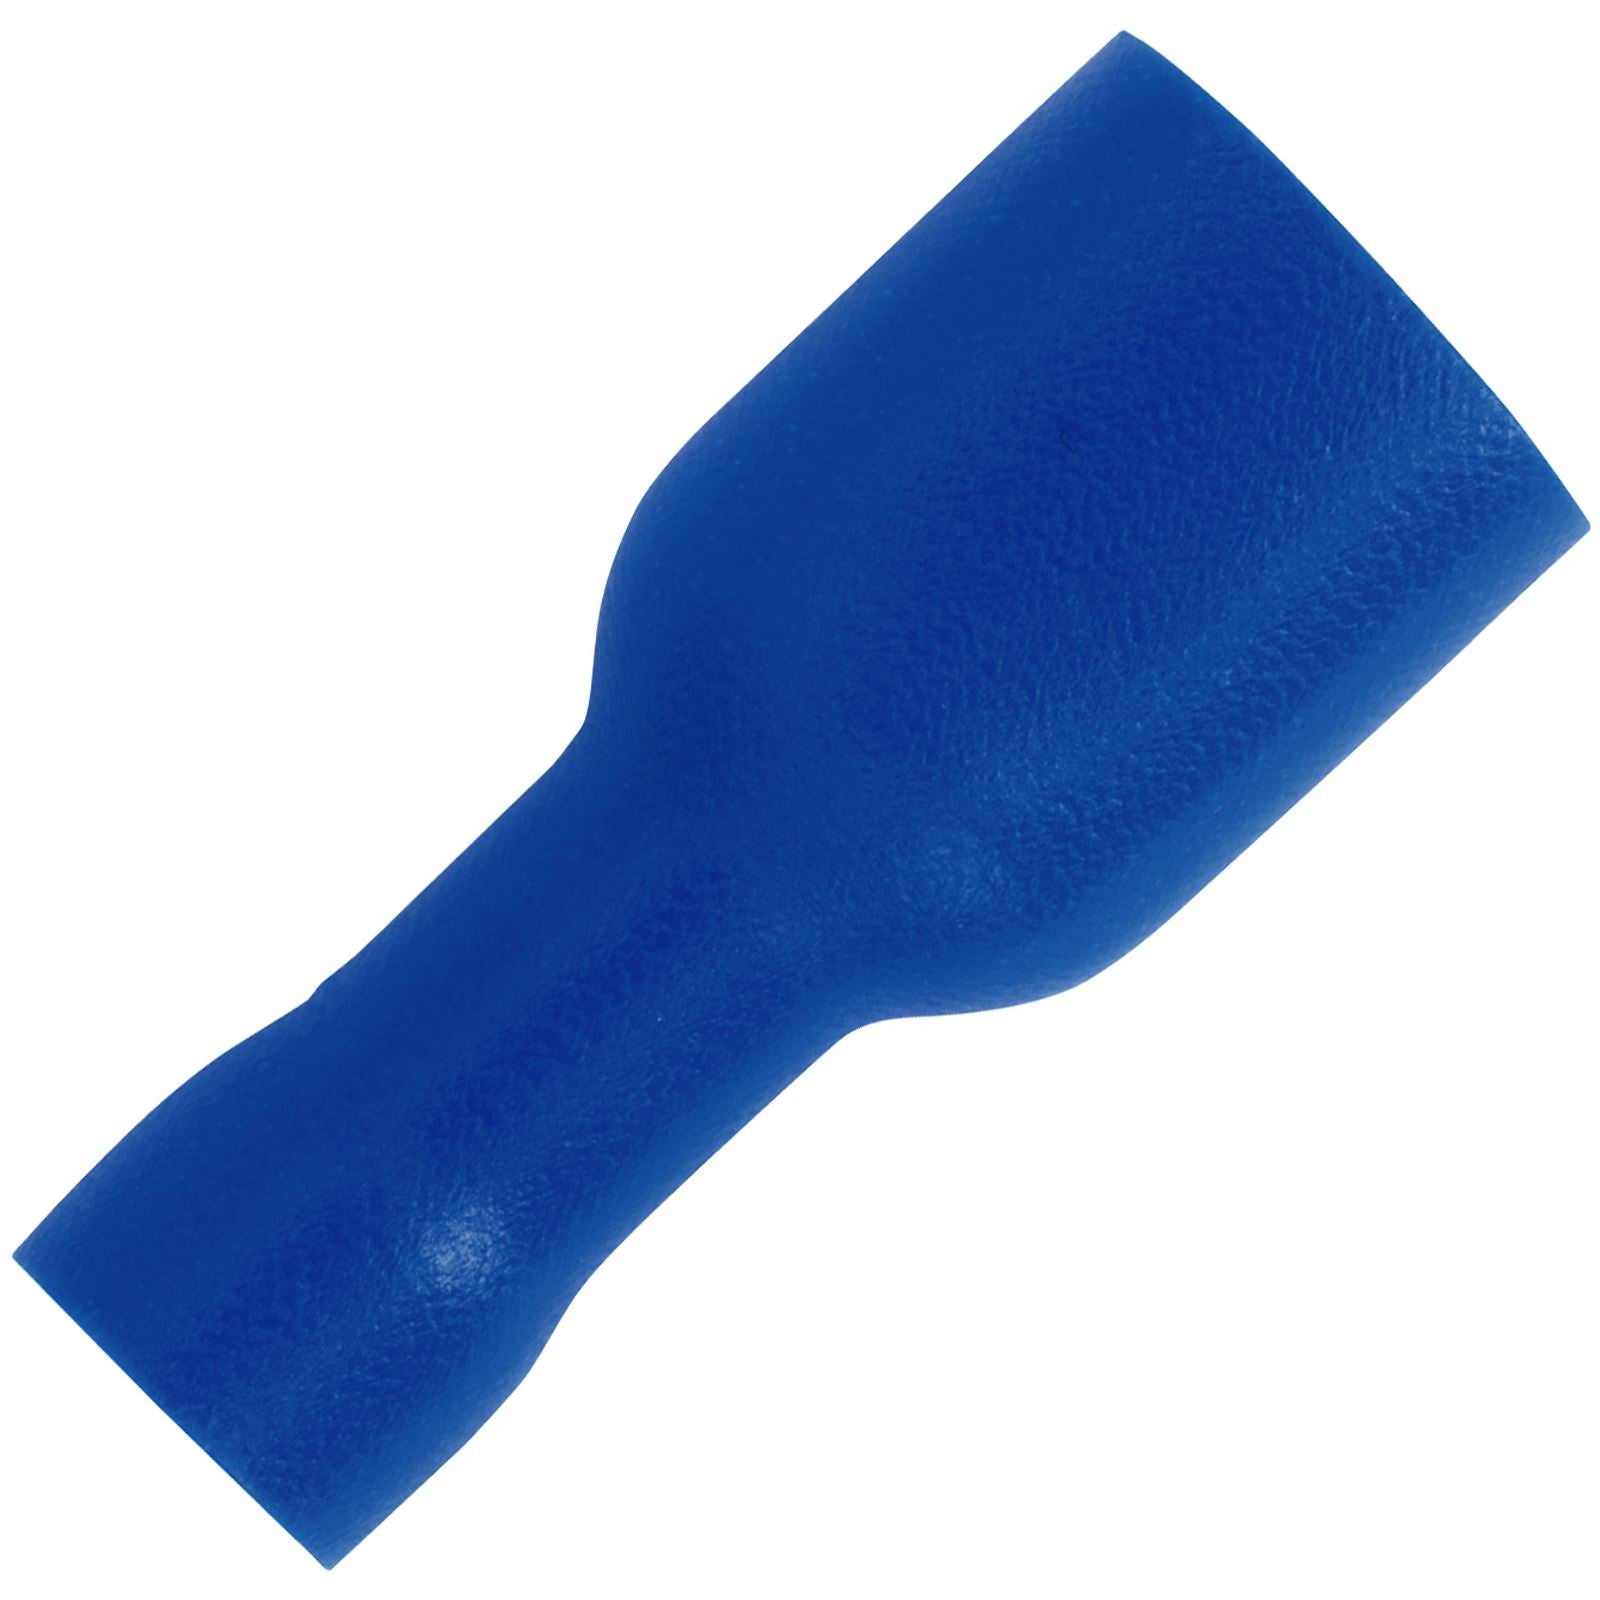 Sealey 100 Pack 6.3mm Blue Fully Insulated Female Terminal